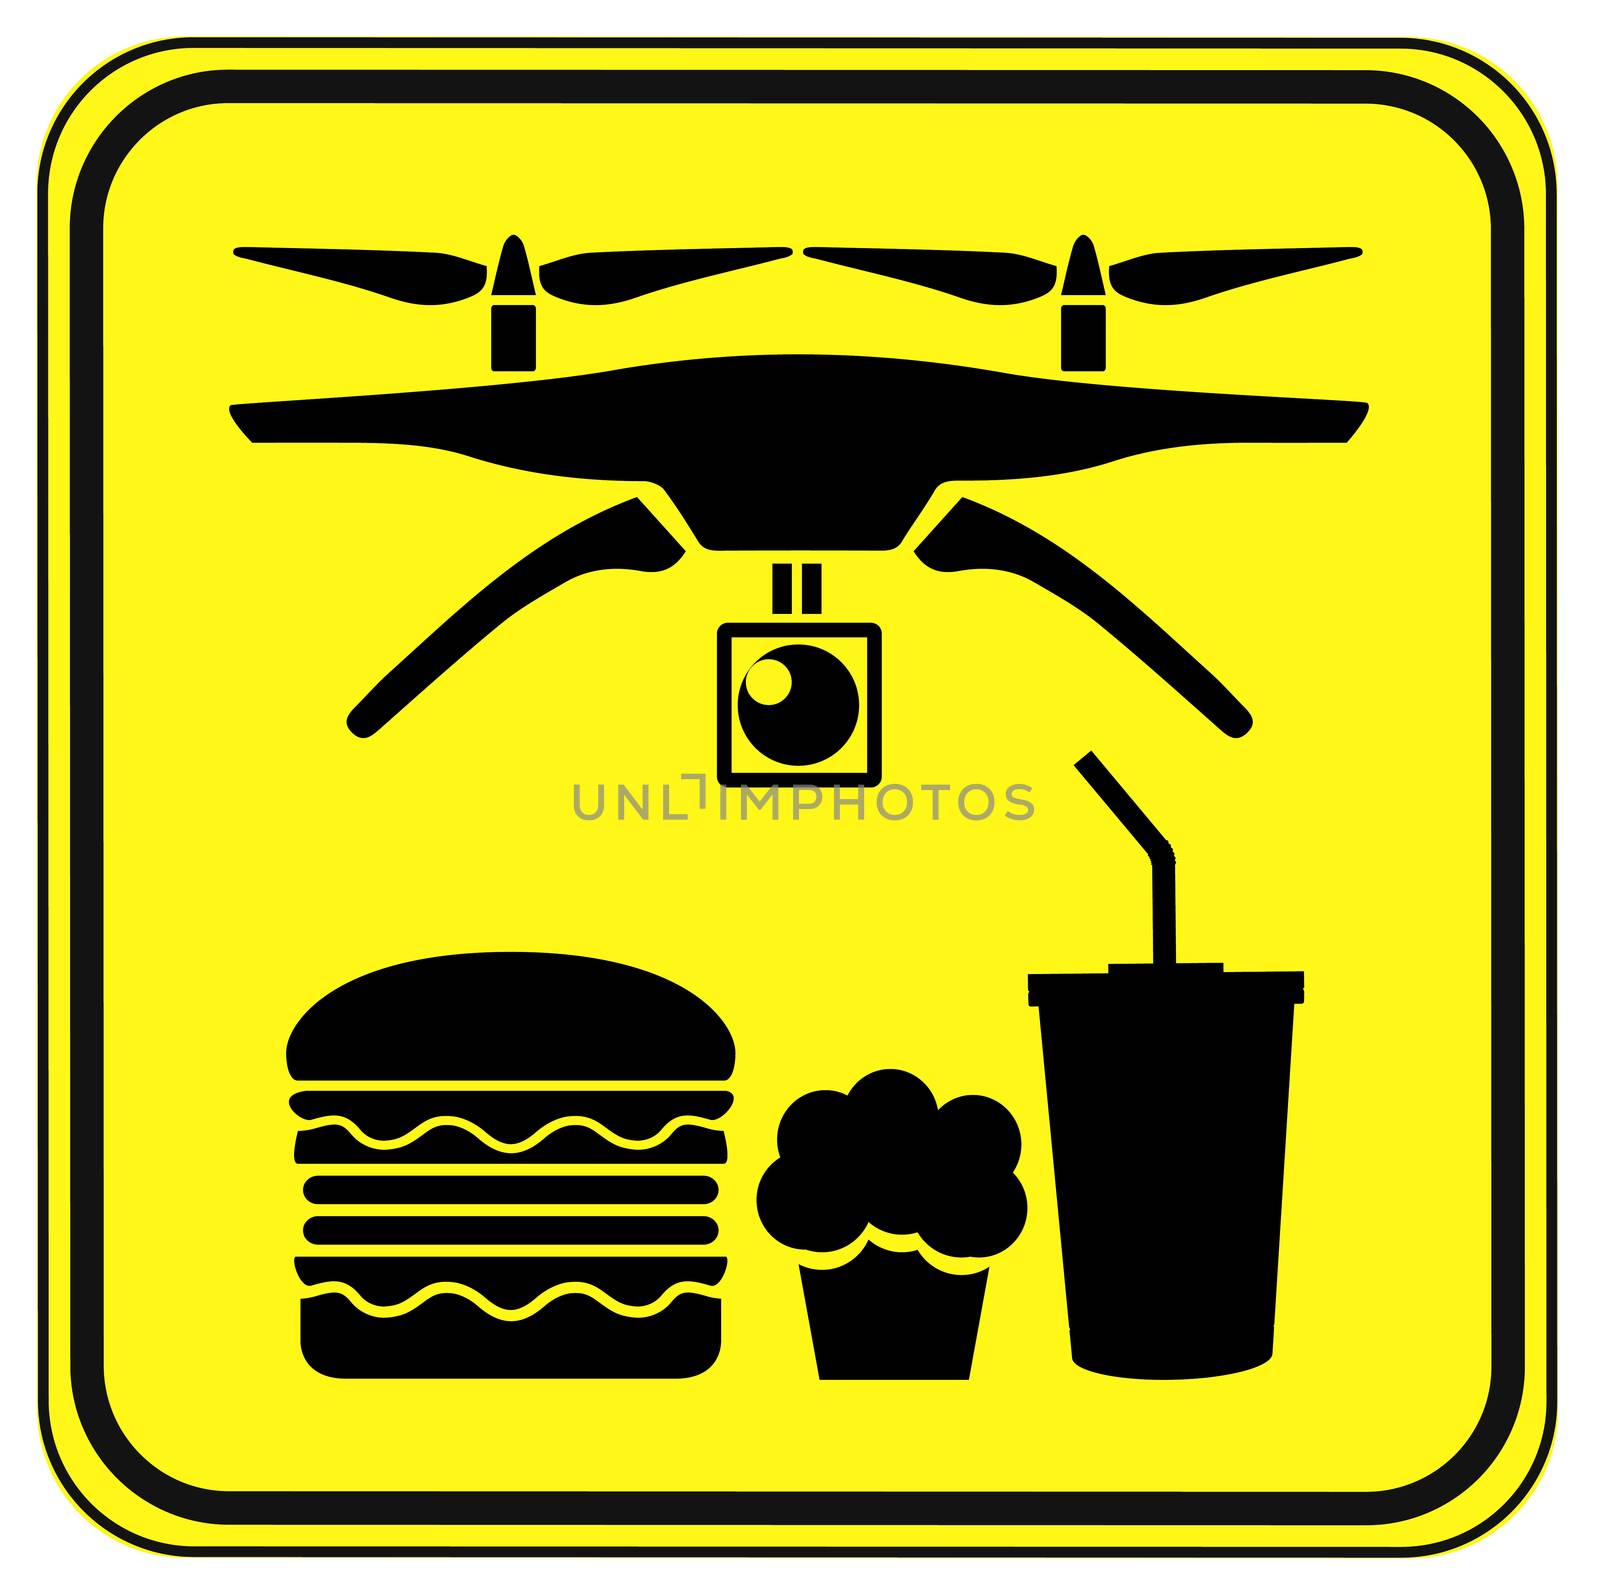 Drones to deliver Fast Food by Bambara